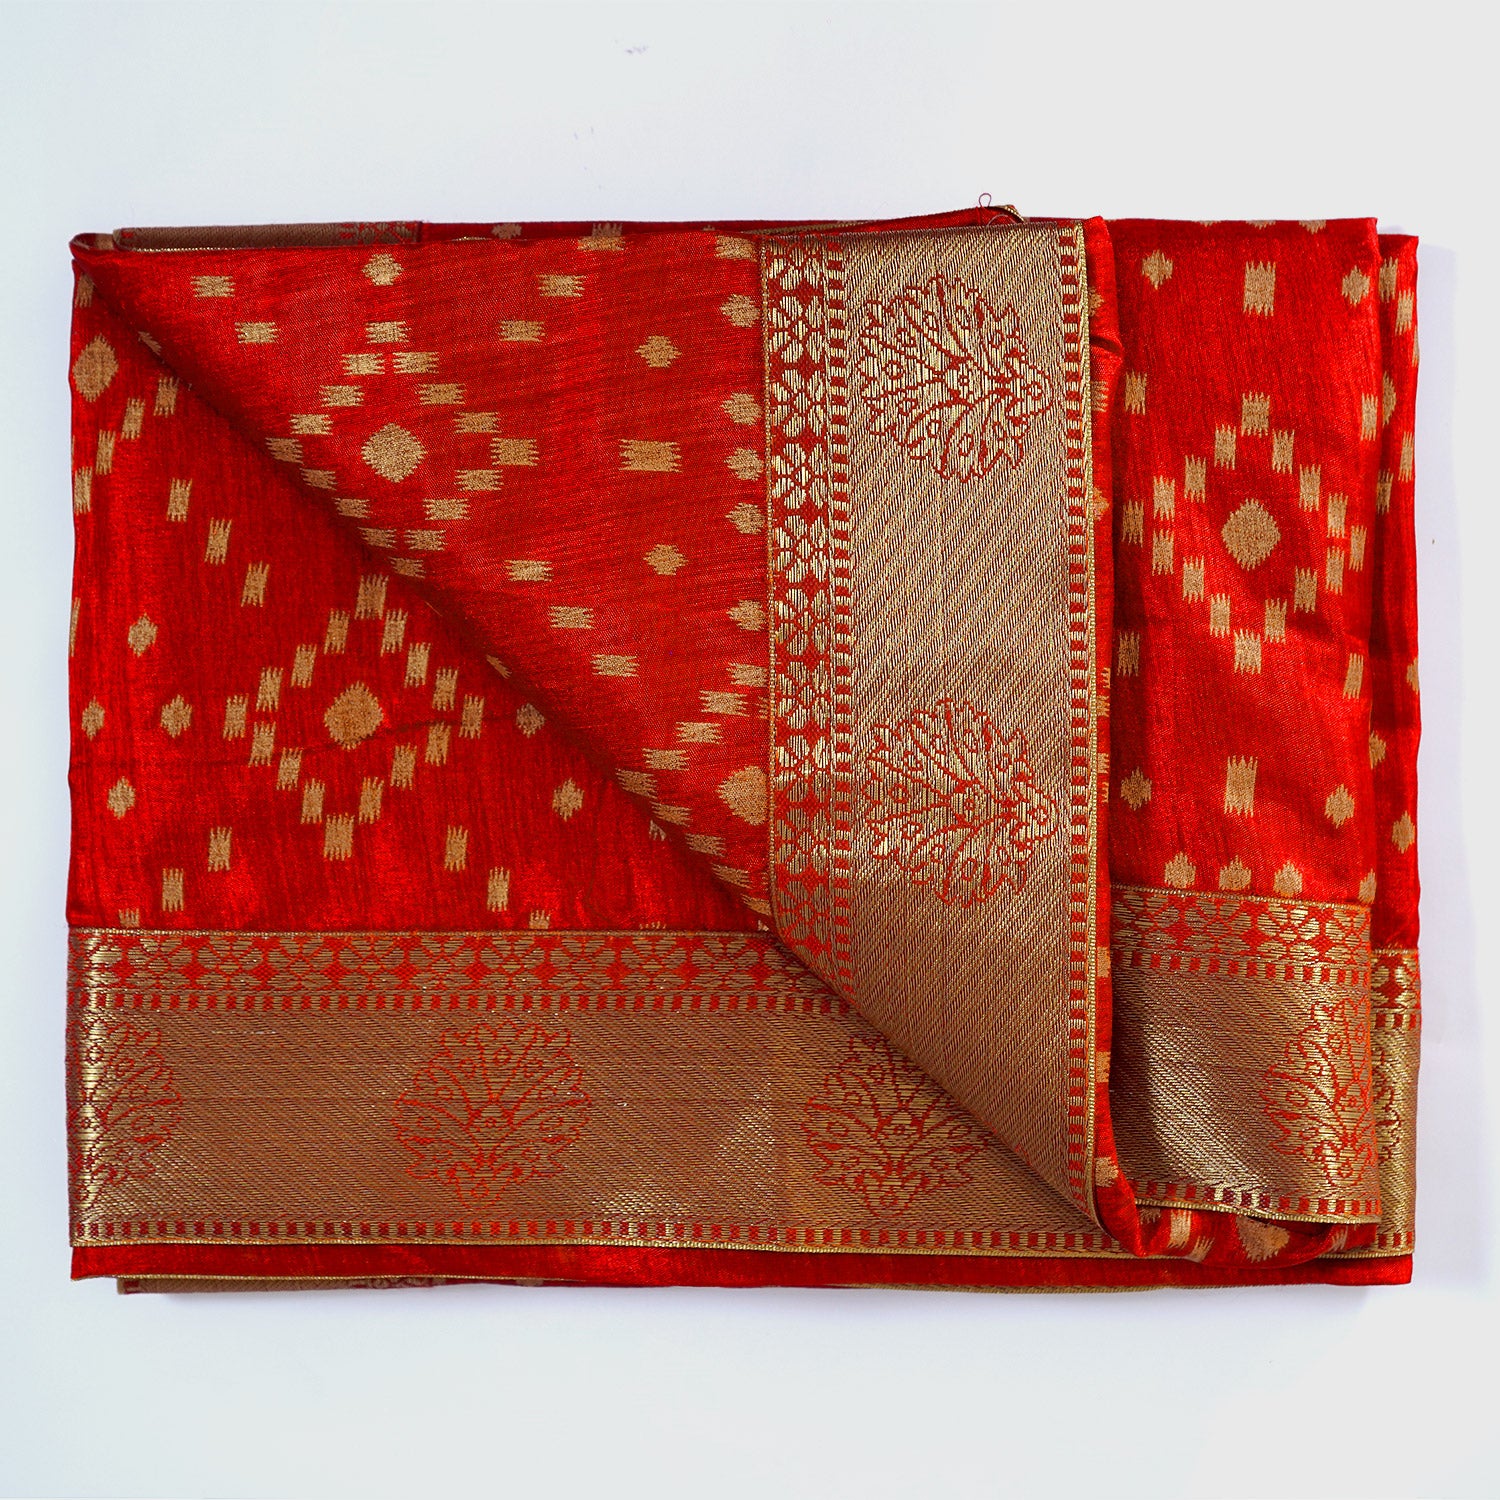 Red Bandhani Silk Saree, Golden Border Traditional Saree, Indian Ethnic Wear, Bloomaya Sarees Online, Premium Silk Saree, Festive Occasion Attire, Classic Indian Wedding Outfit, Elegant Ethnic Fashion, Cultural Heritage Clothing, Red and Gold Silk Saree.